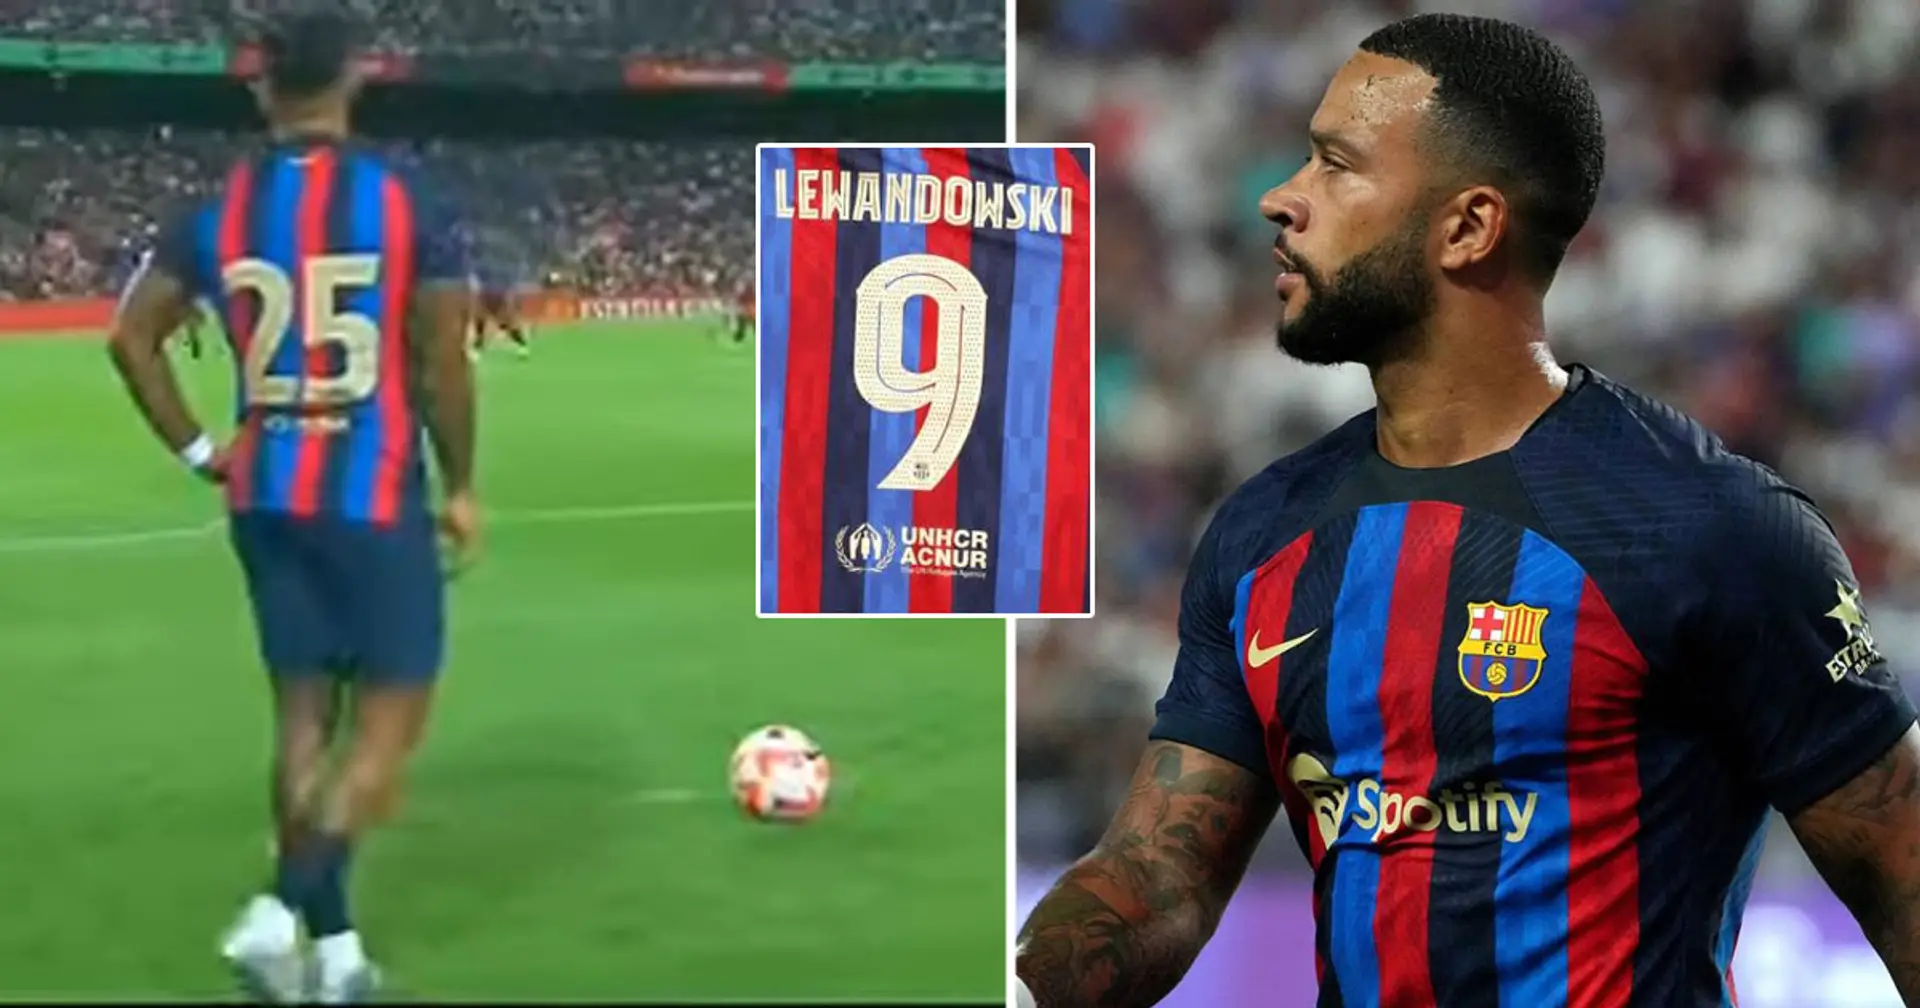 'That 25 doesn’t suit him': Barca fan suggest shirt number Memphis should take if he stays – culers agree